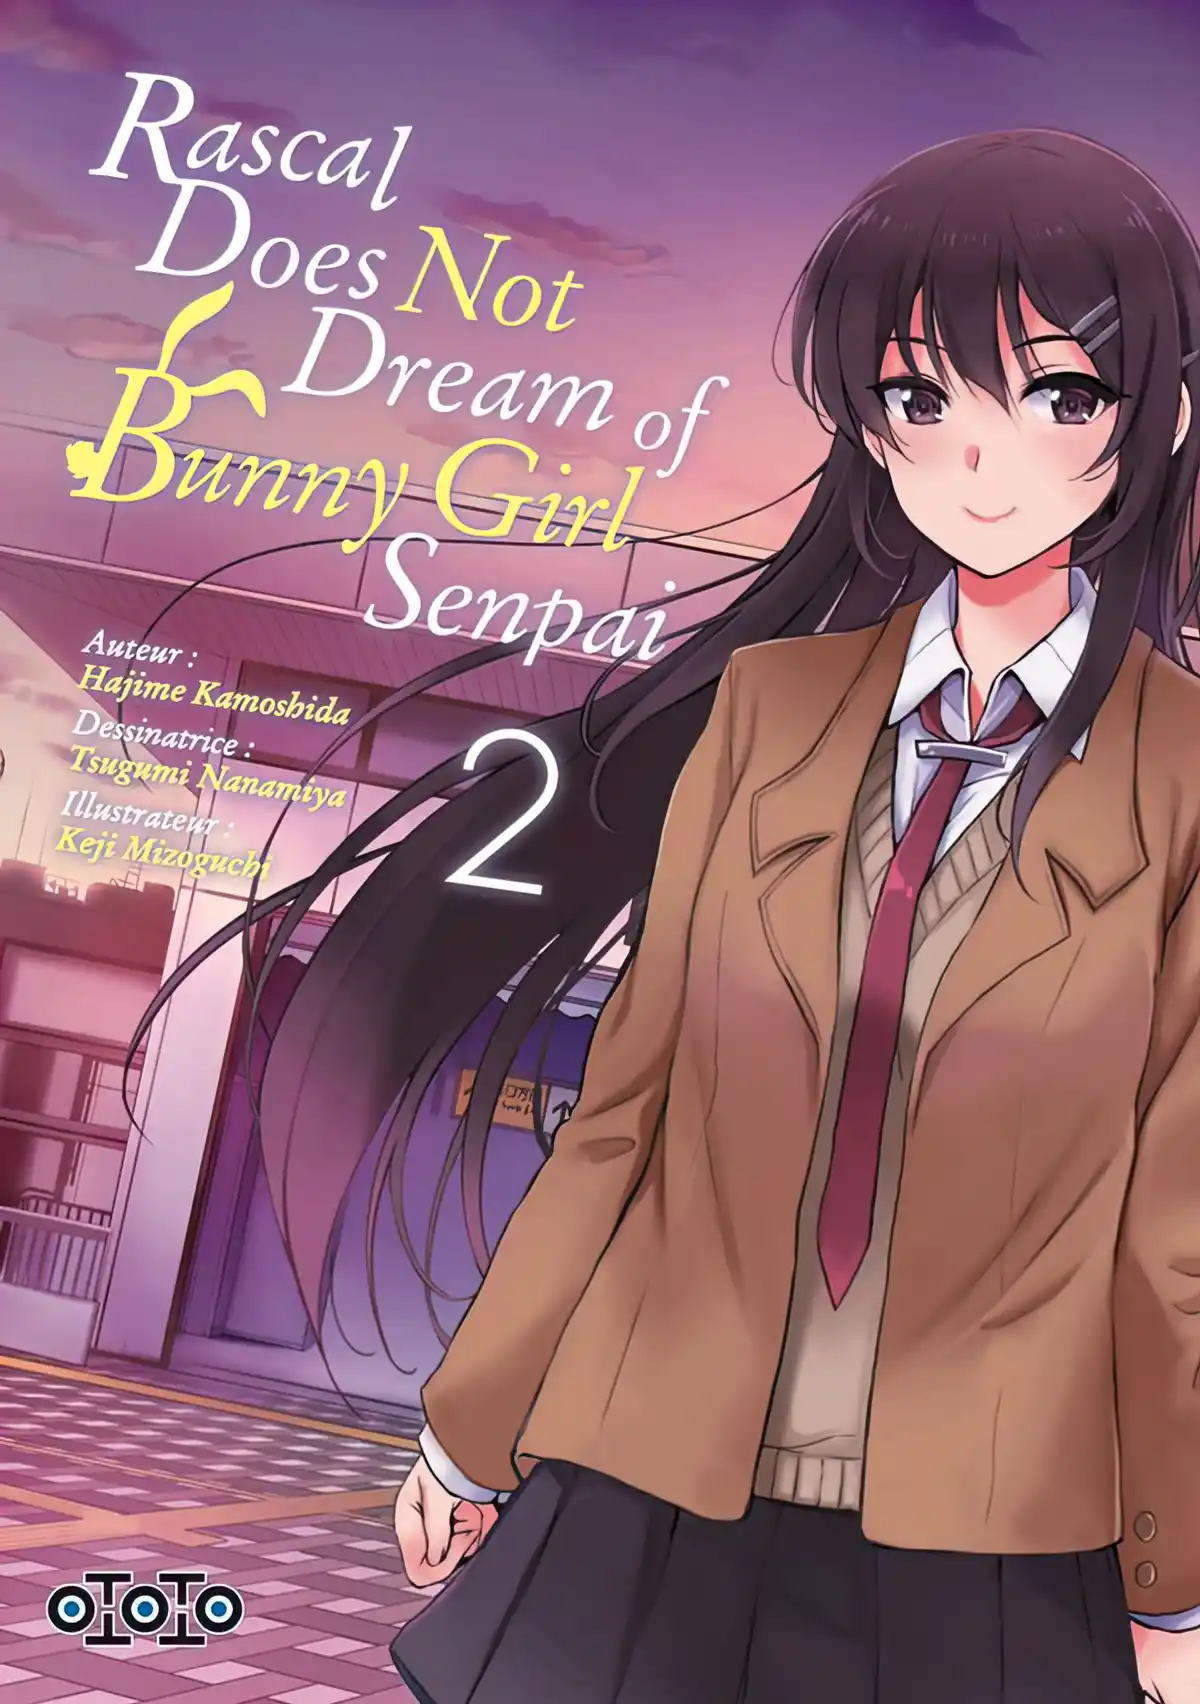 Rascal Does Not Dream of Bunny Girl Senpai Volume 2 page 1